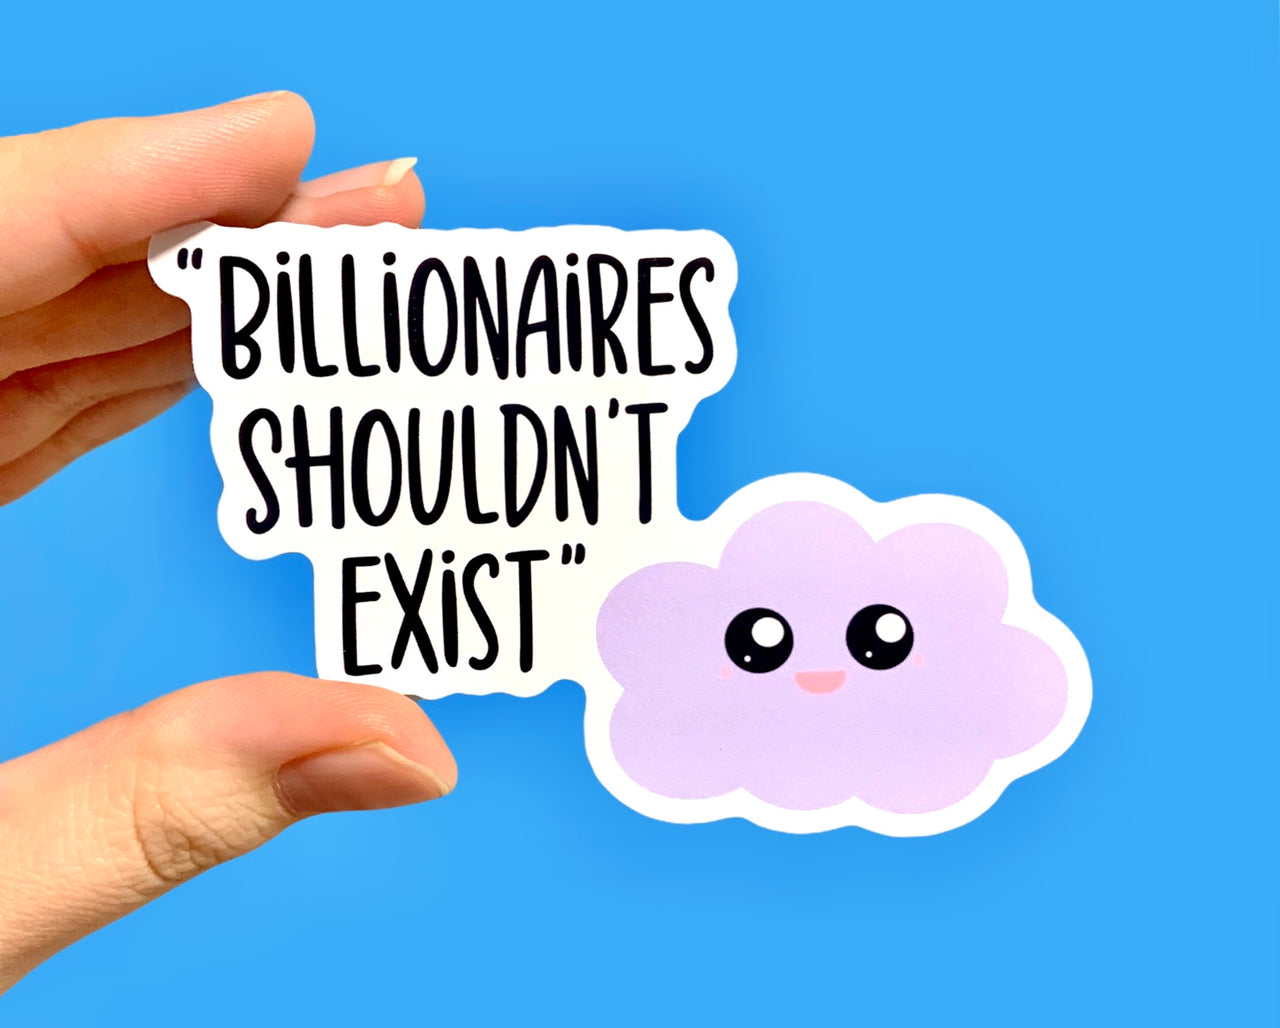 Billionaires shouldn’t exist (pack of 3 or 5 stickers)